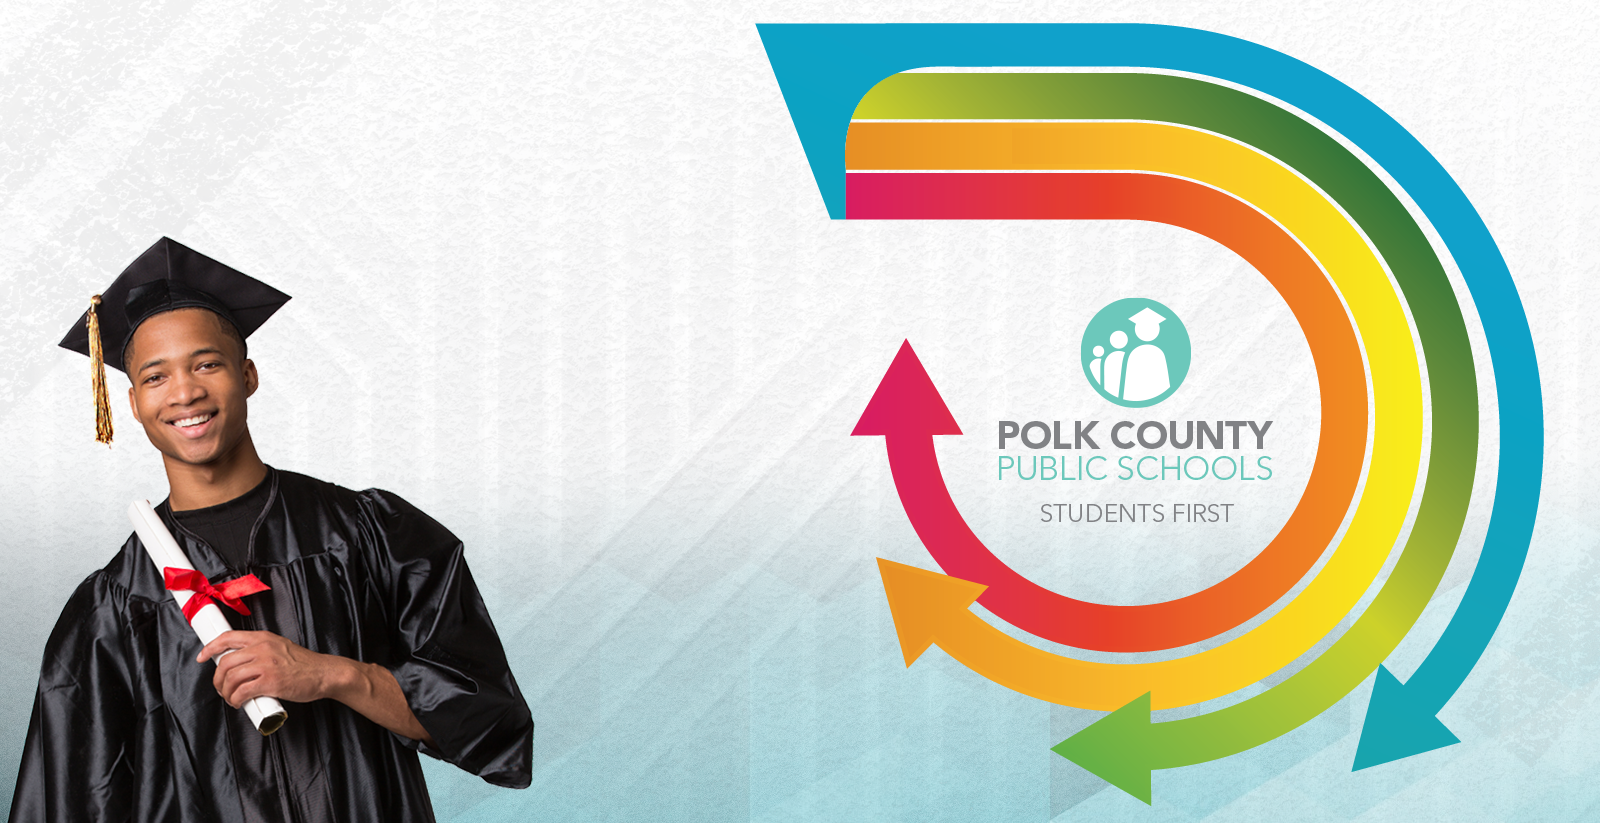 student in bottom left and district logo surrounded by arrows